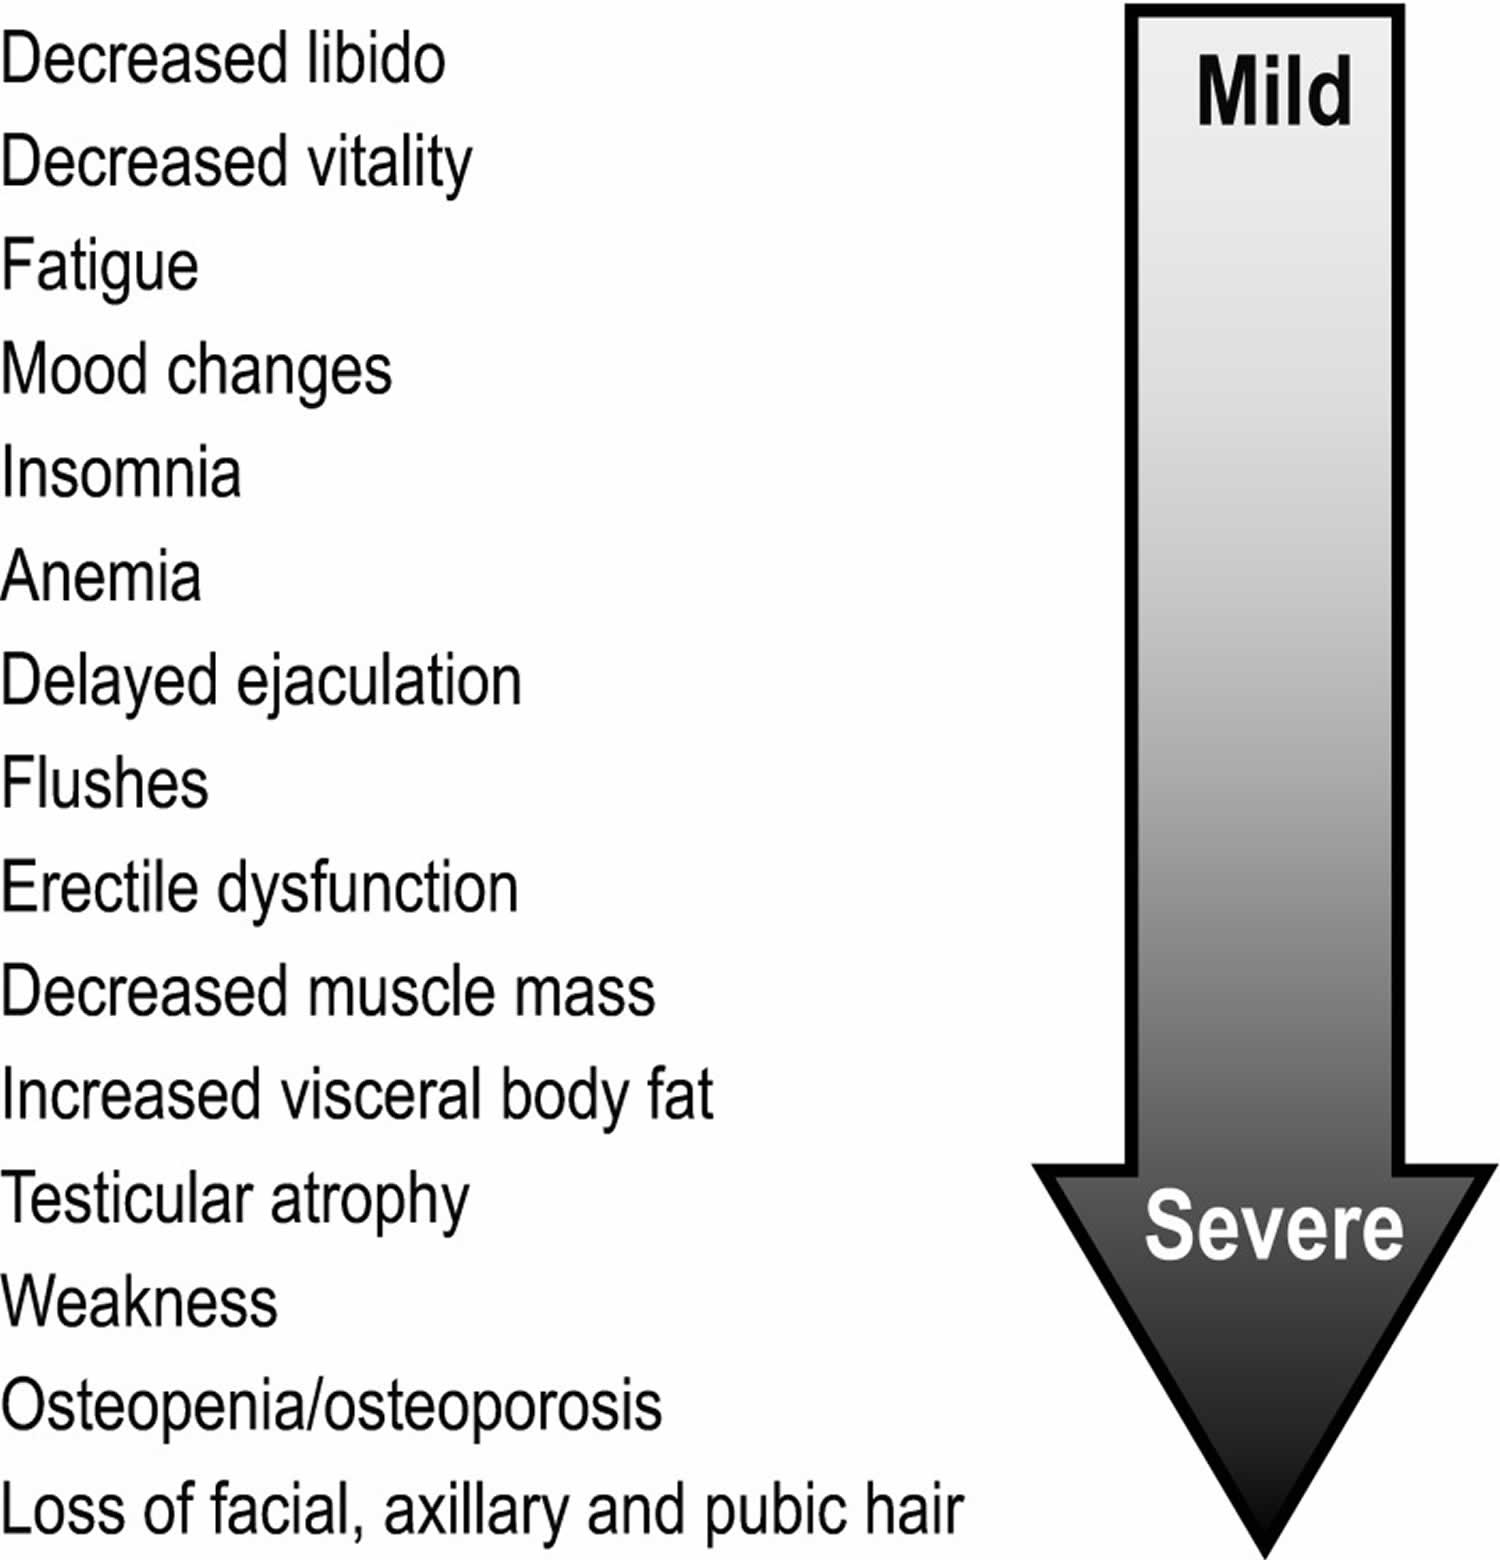 Testosterone deficiency signs and symptoms